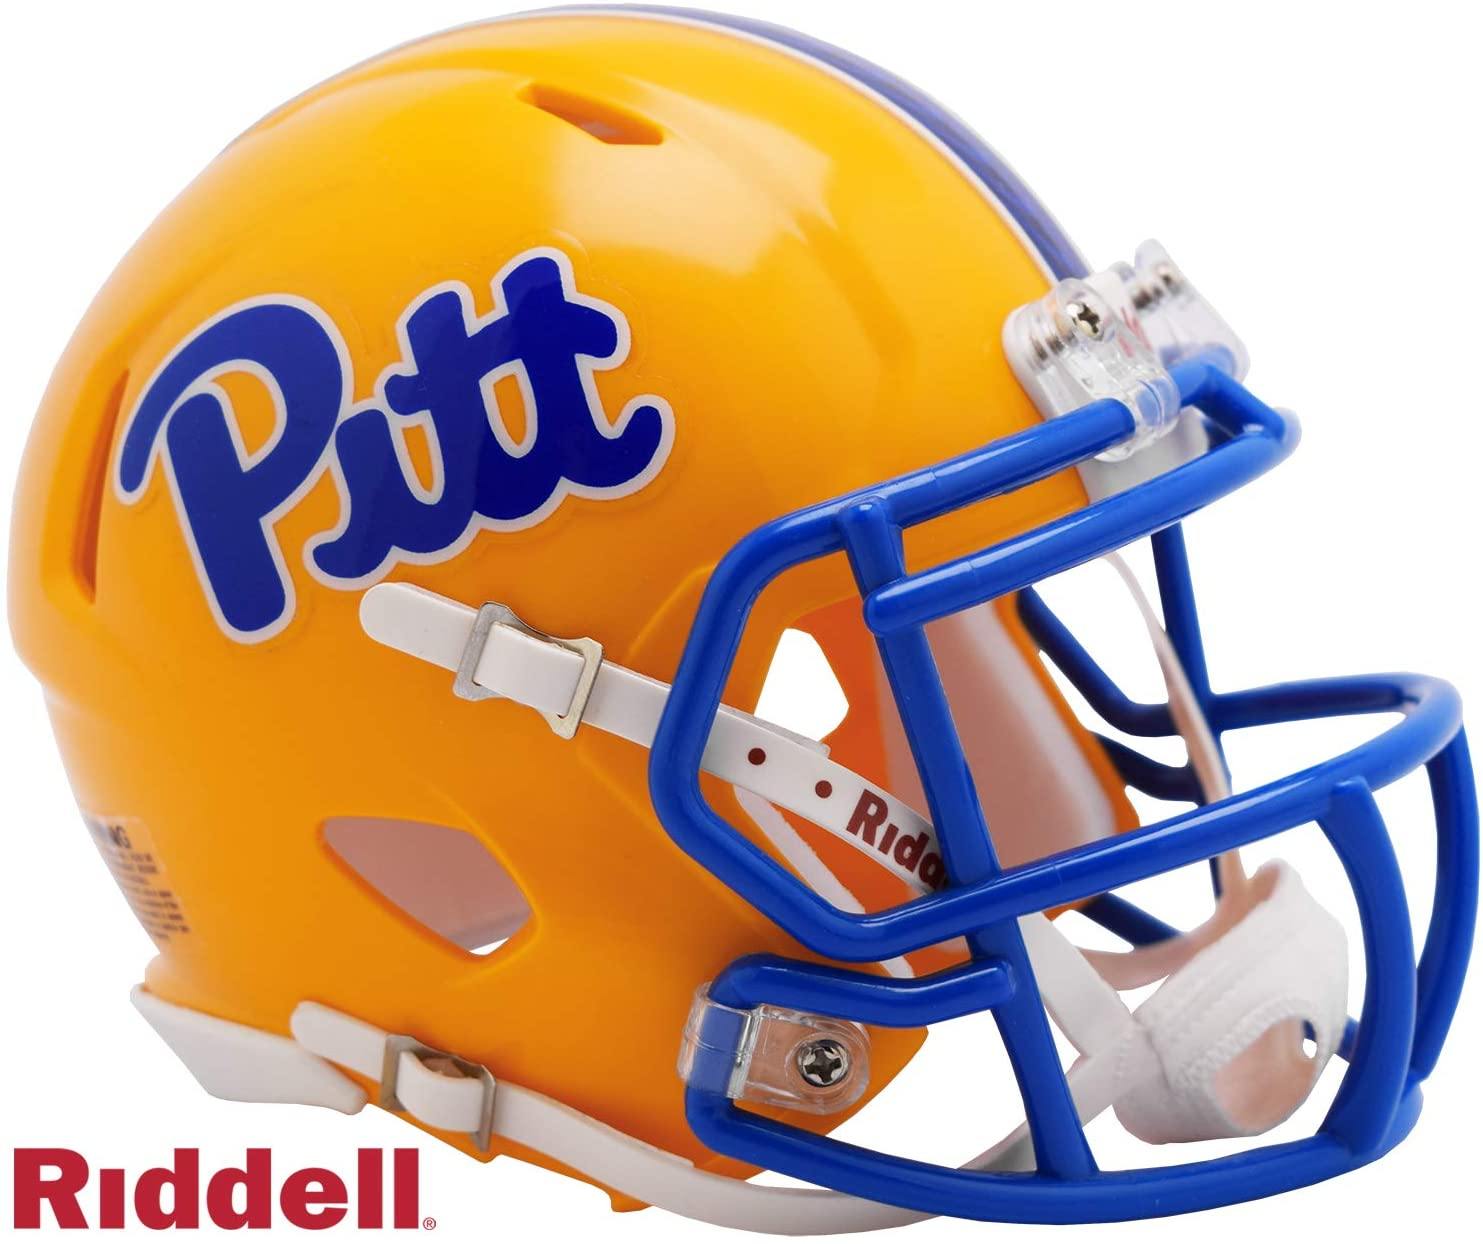 Pittsburgh Panthers College Football Collectible Riddell Mini Helmet - Picture Inside - FANZ Collectibles - Fanz Collectibles